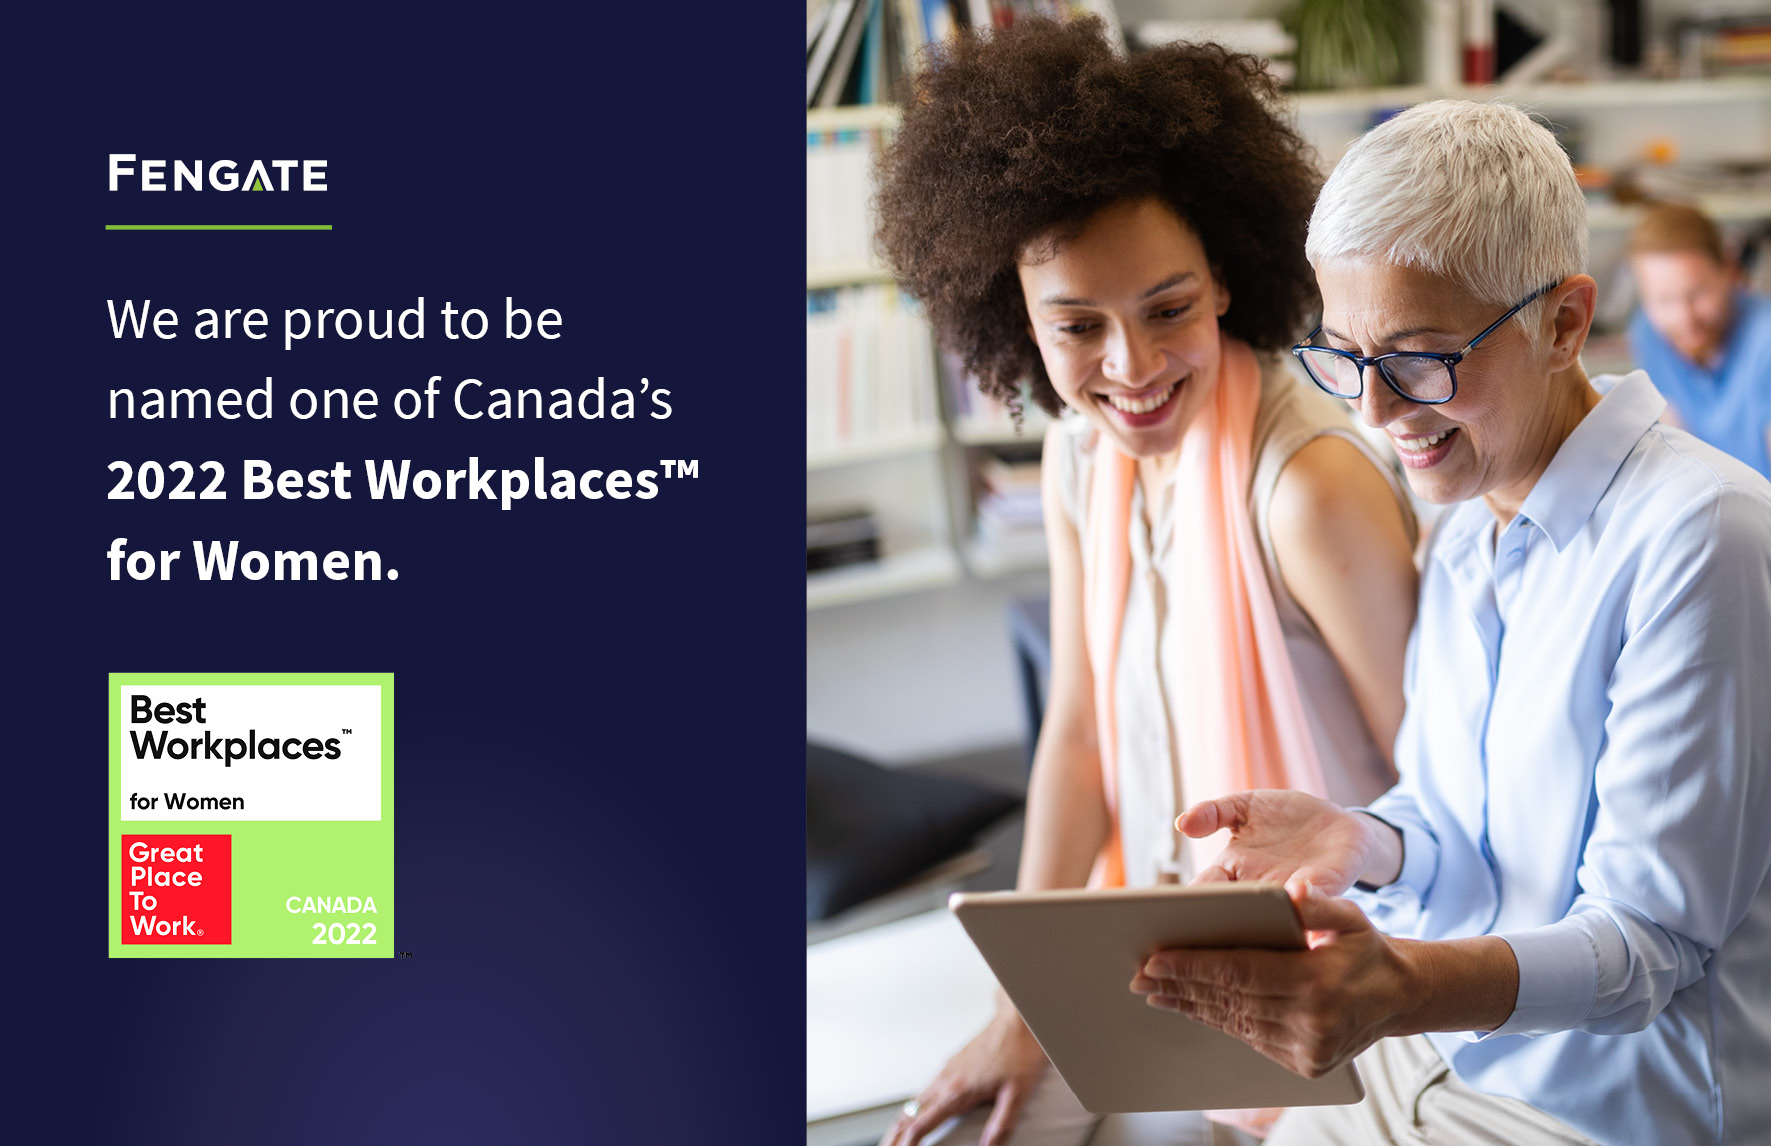 Fengate named one of Canada’s 2022 Best Workplaces™ for Women